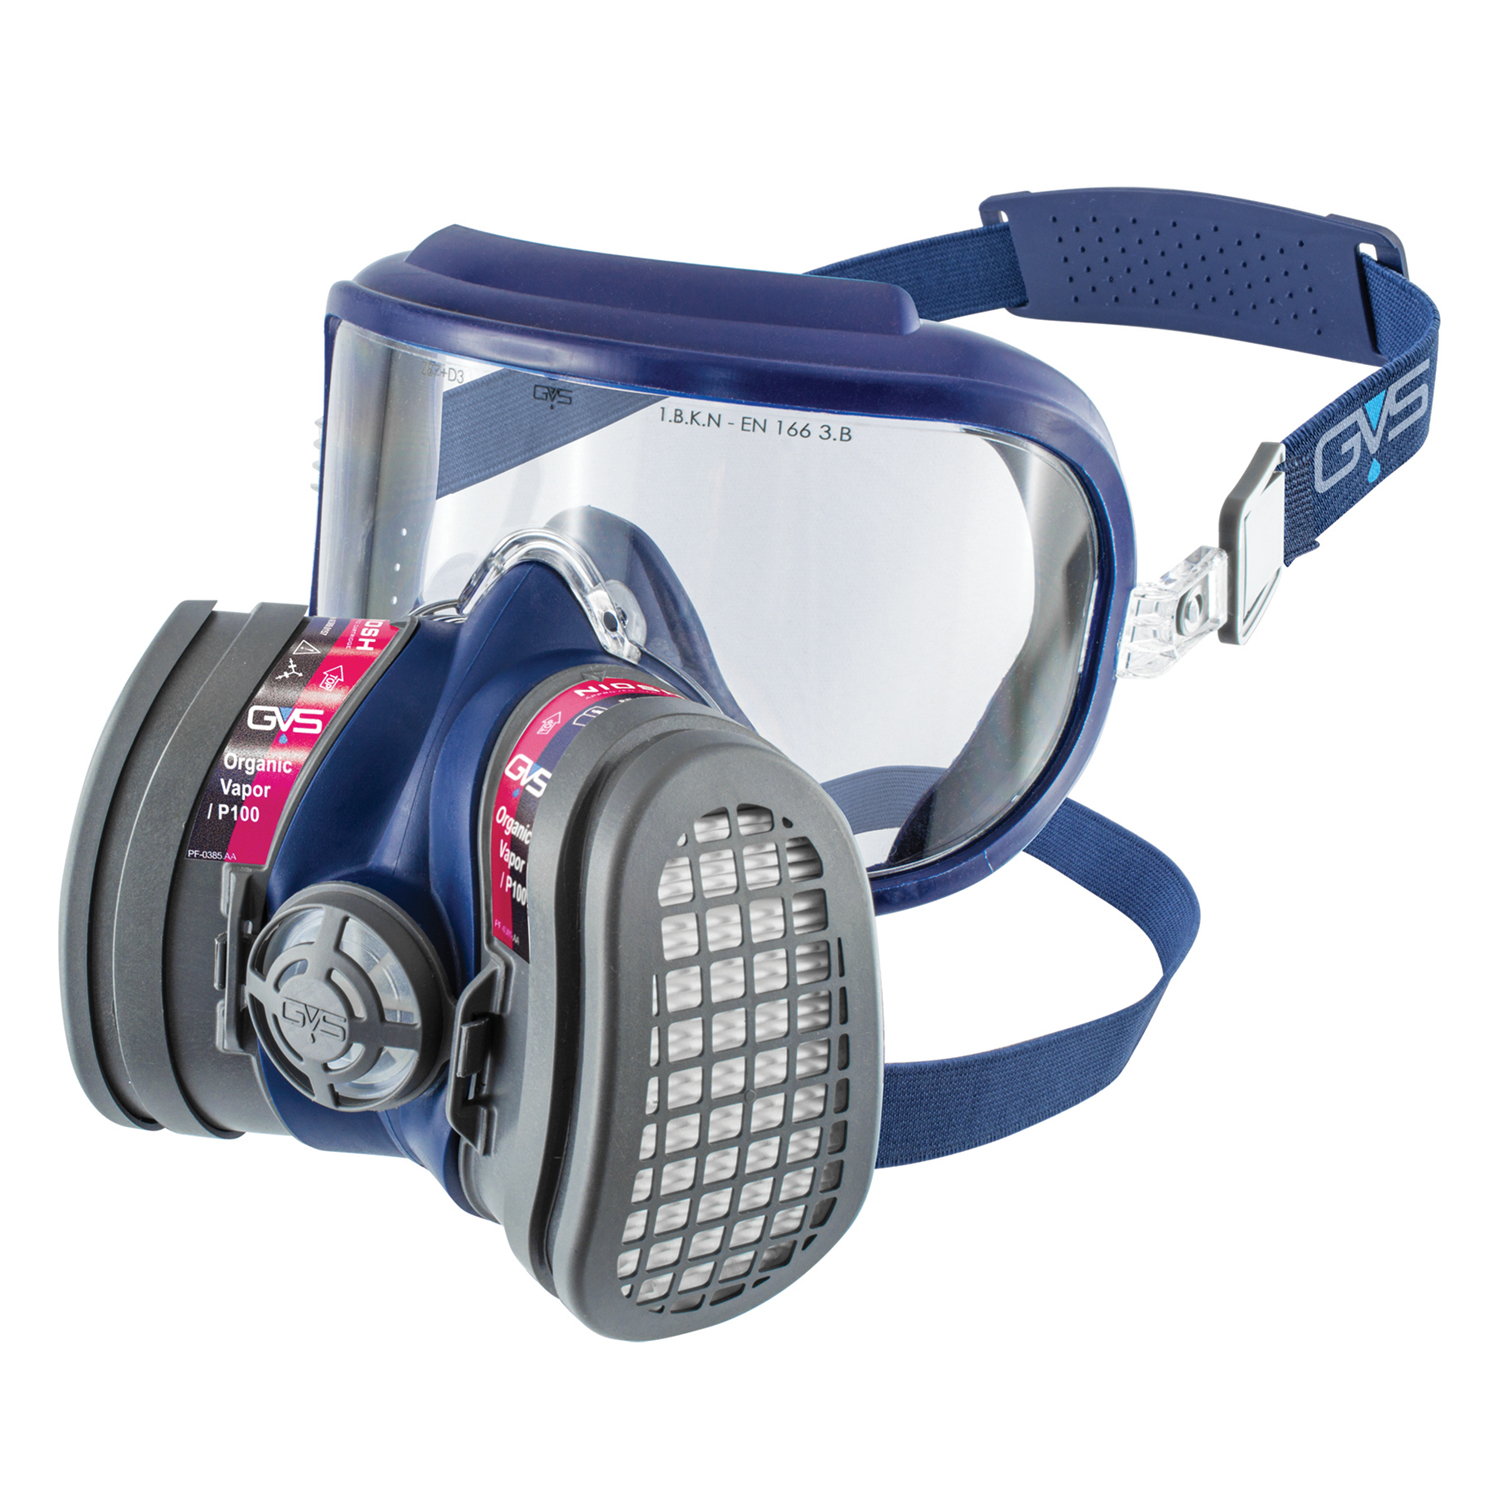 SPR660 M/Lg Mask w/Organic Vapor/P100 filter and integrated goggles